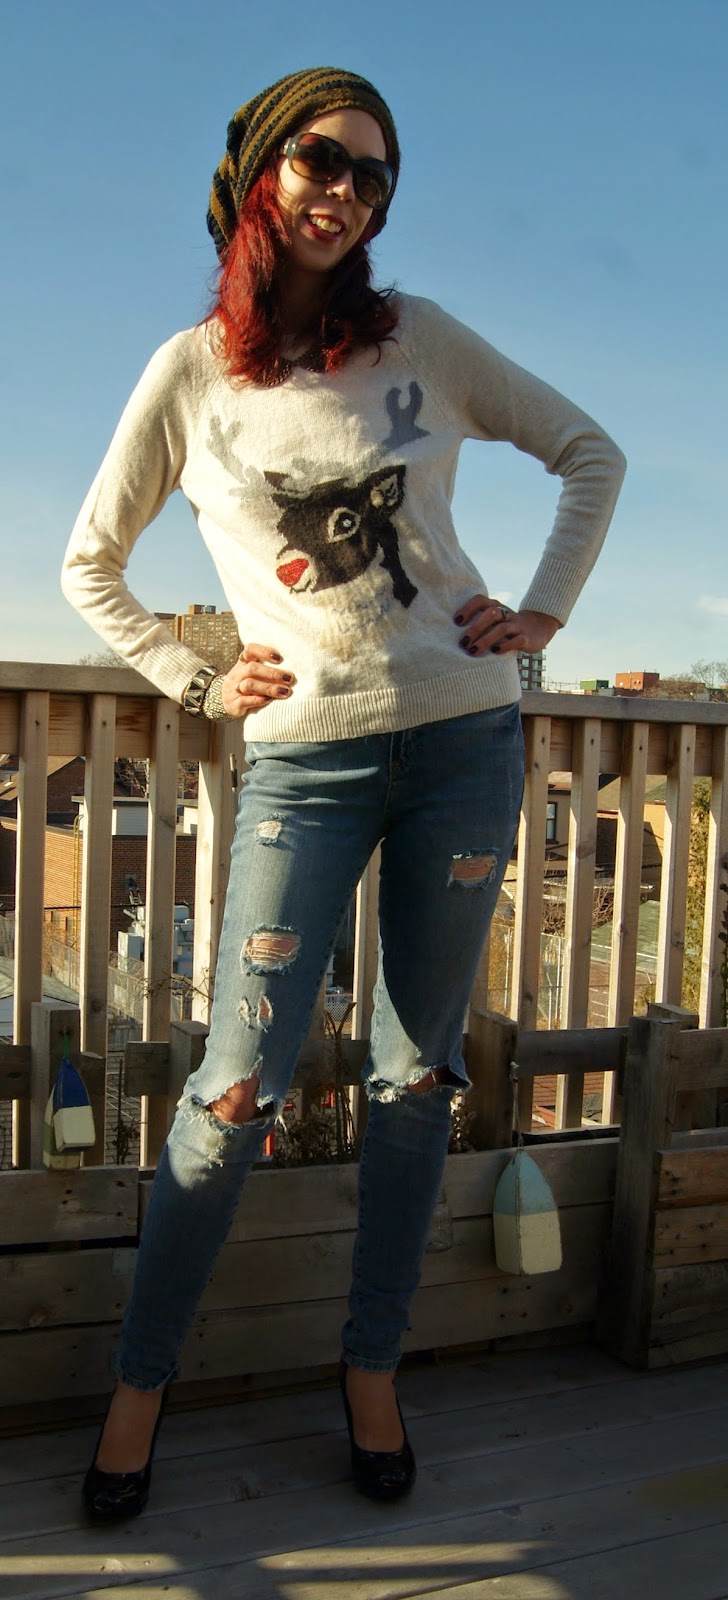 My Style!: H&M Reindeer Sweater, Noisy May Distressed Jeans from Hudson's Bay, Shop For Jayu Bracelet, holiday, fashion, winter, merry, outfit, OOTD, the purple scarf, melanieps, toronto, ontario, canada, necklace, pugs gear, toque